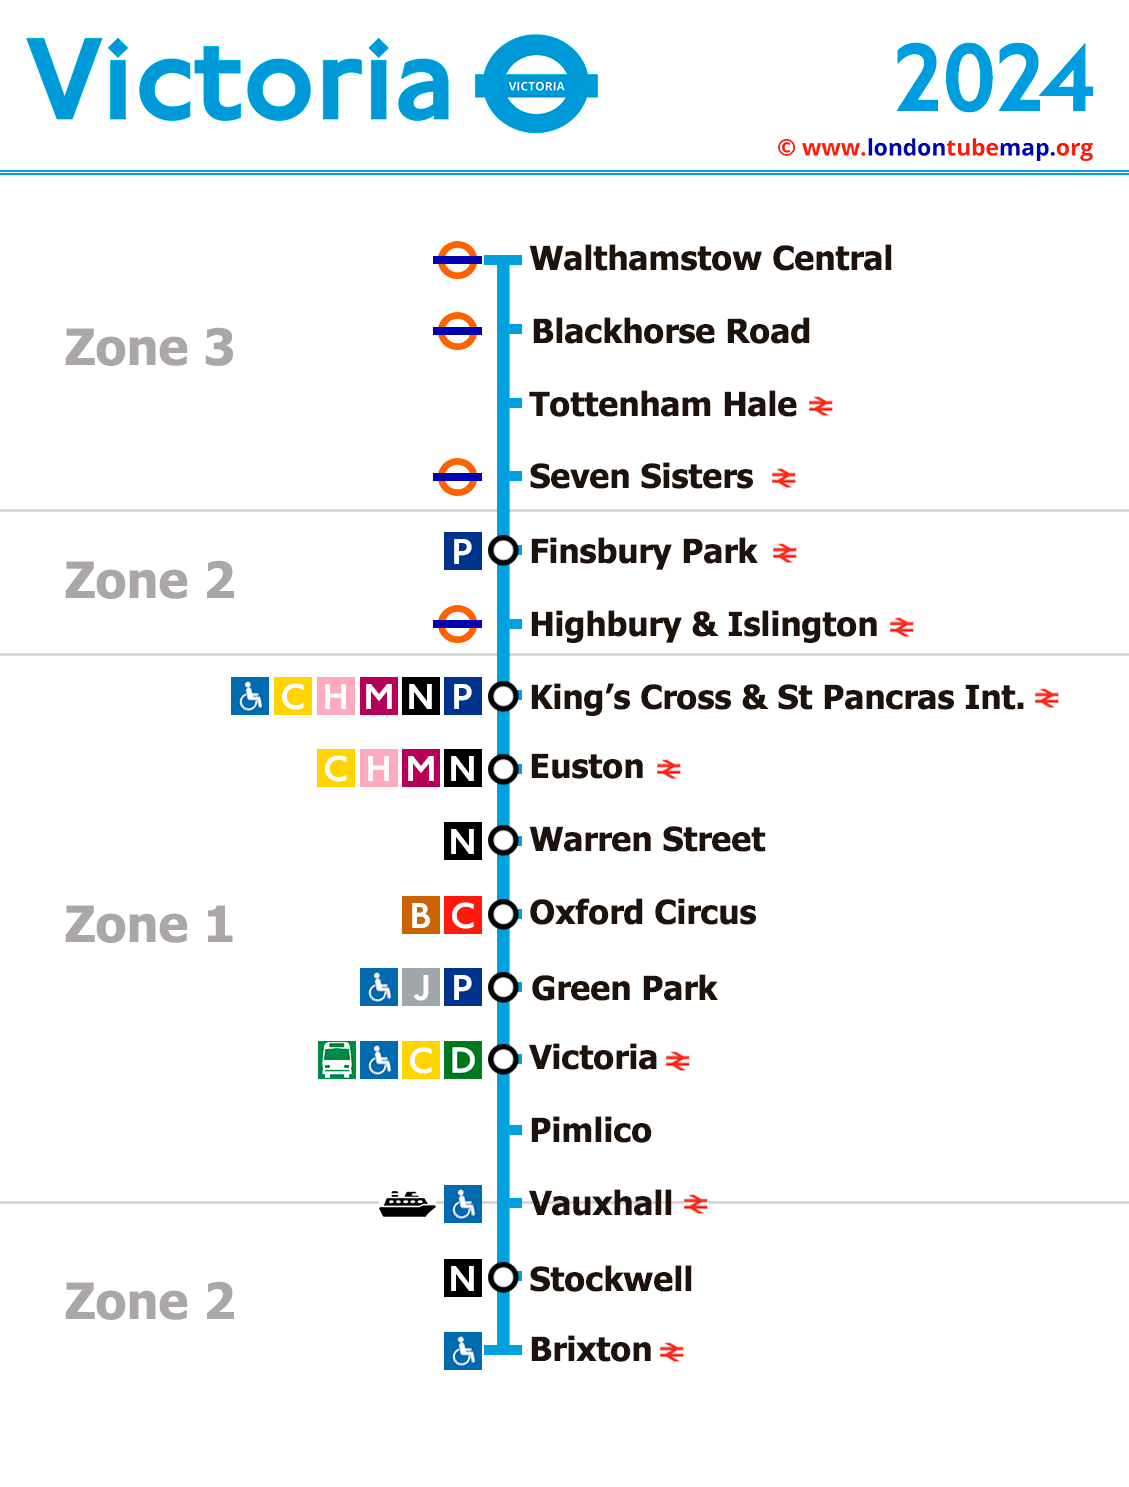 The Best Places to go on the Victoria Line